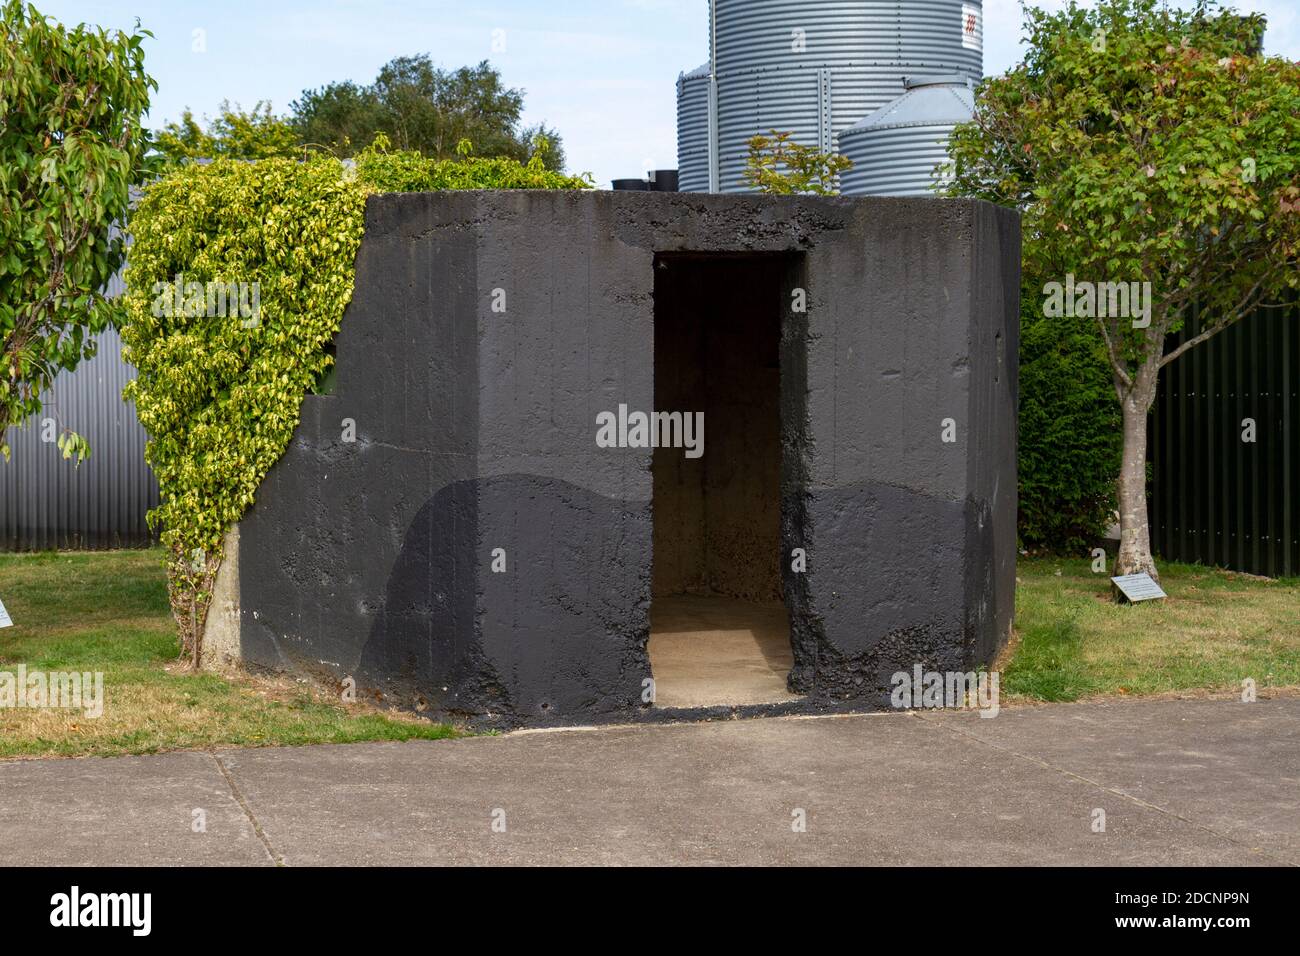 Original Airfield Air raid Shelter (RAF East Kirkby), Lincolnshire Aviation Heritage Museum, East Kirkby, Spilsby, Lincs, Regno Unito. Foto Stock